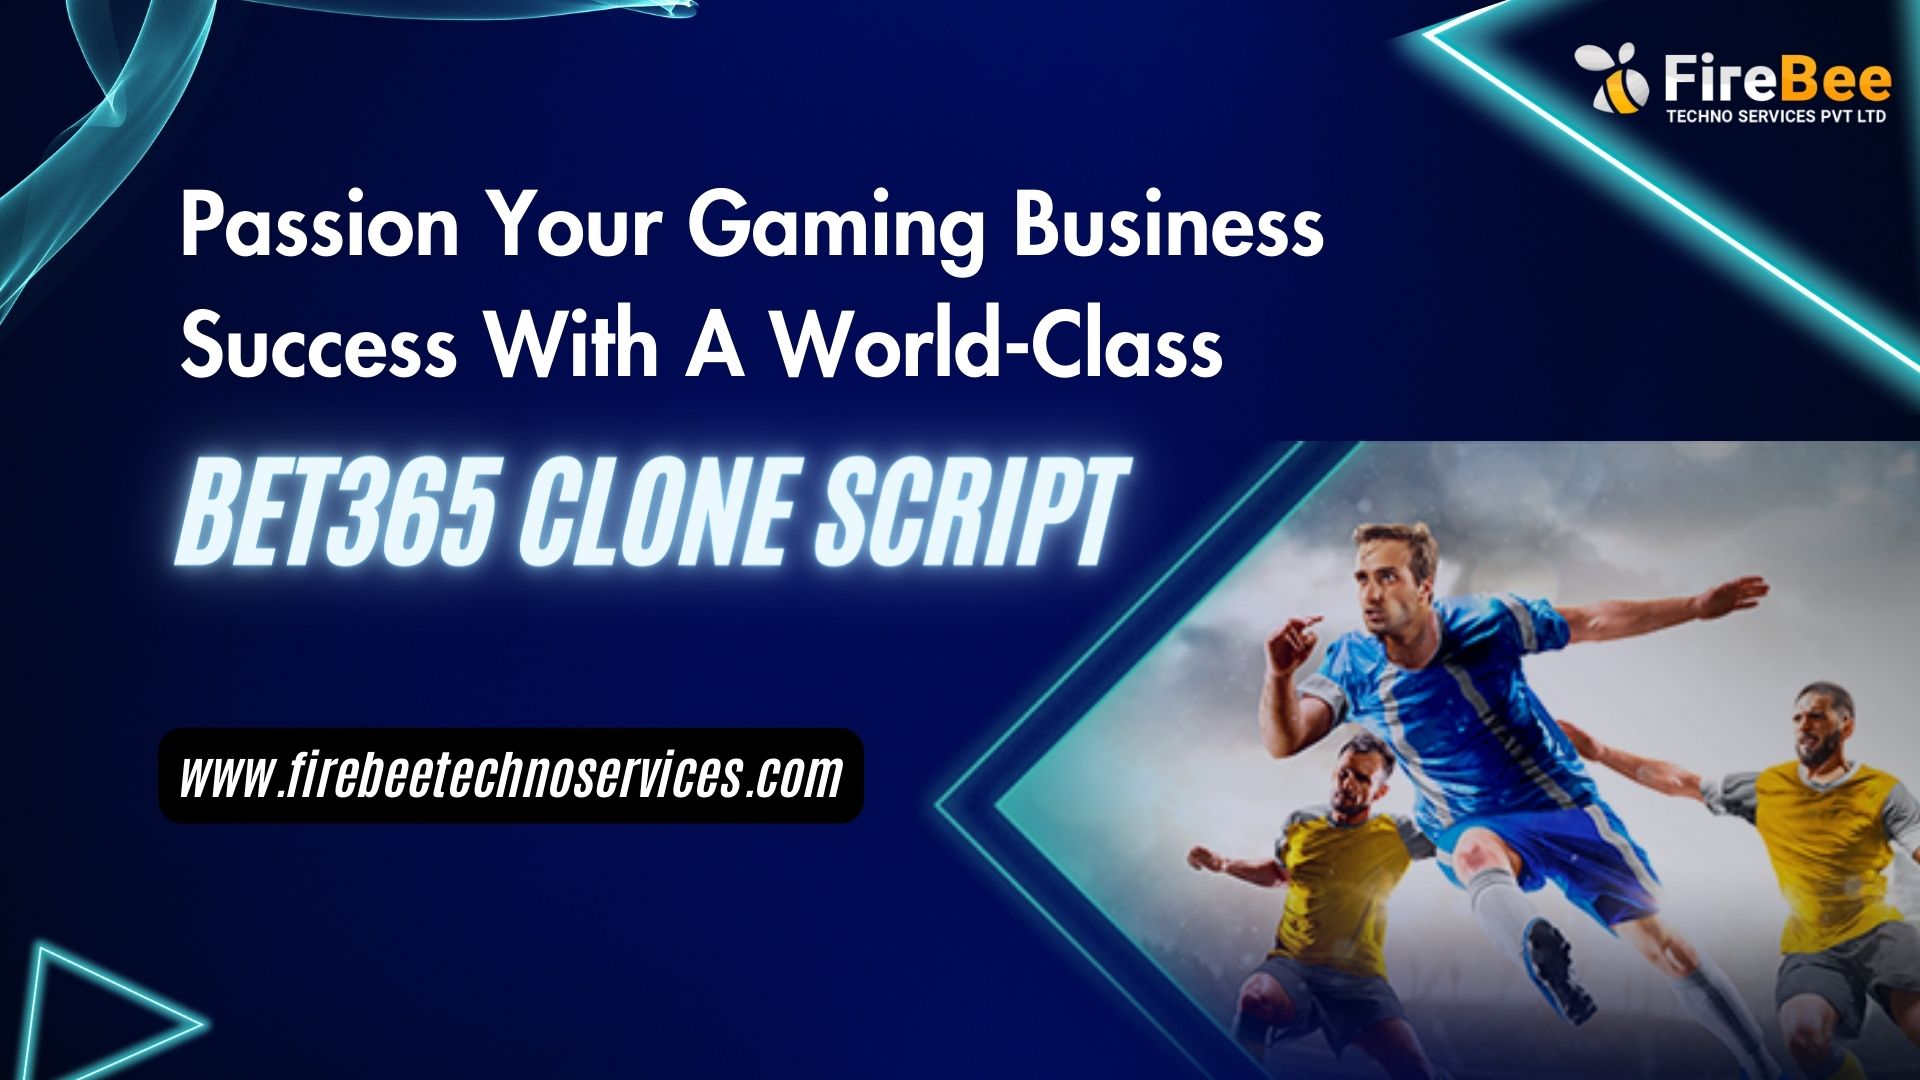 Passion Your Gaming Business Success With A World-Class Bet365 Clone Script